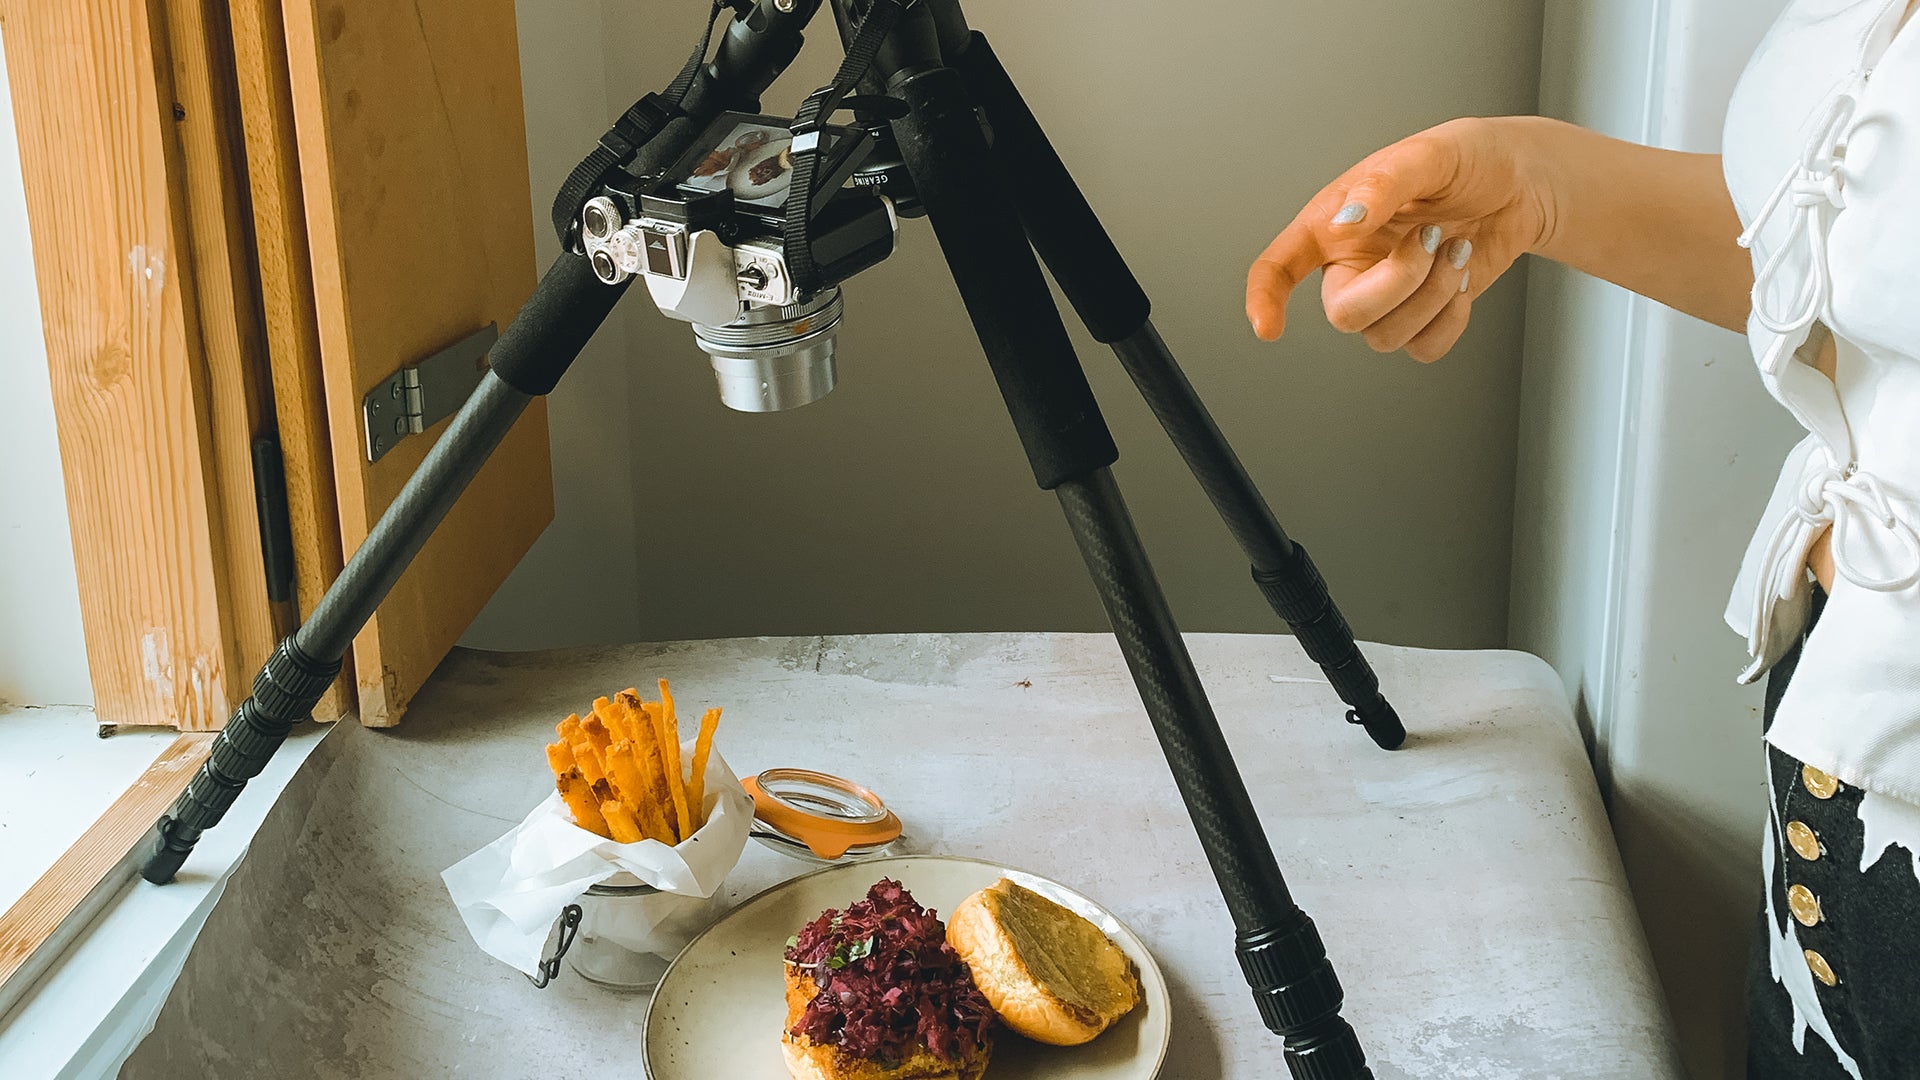 Food Photography with Gearing - A day in the life of Rude Nude Food